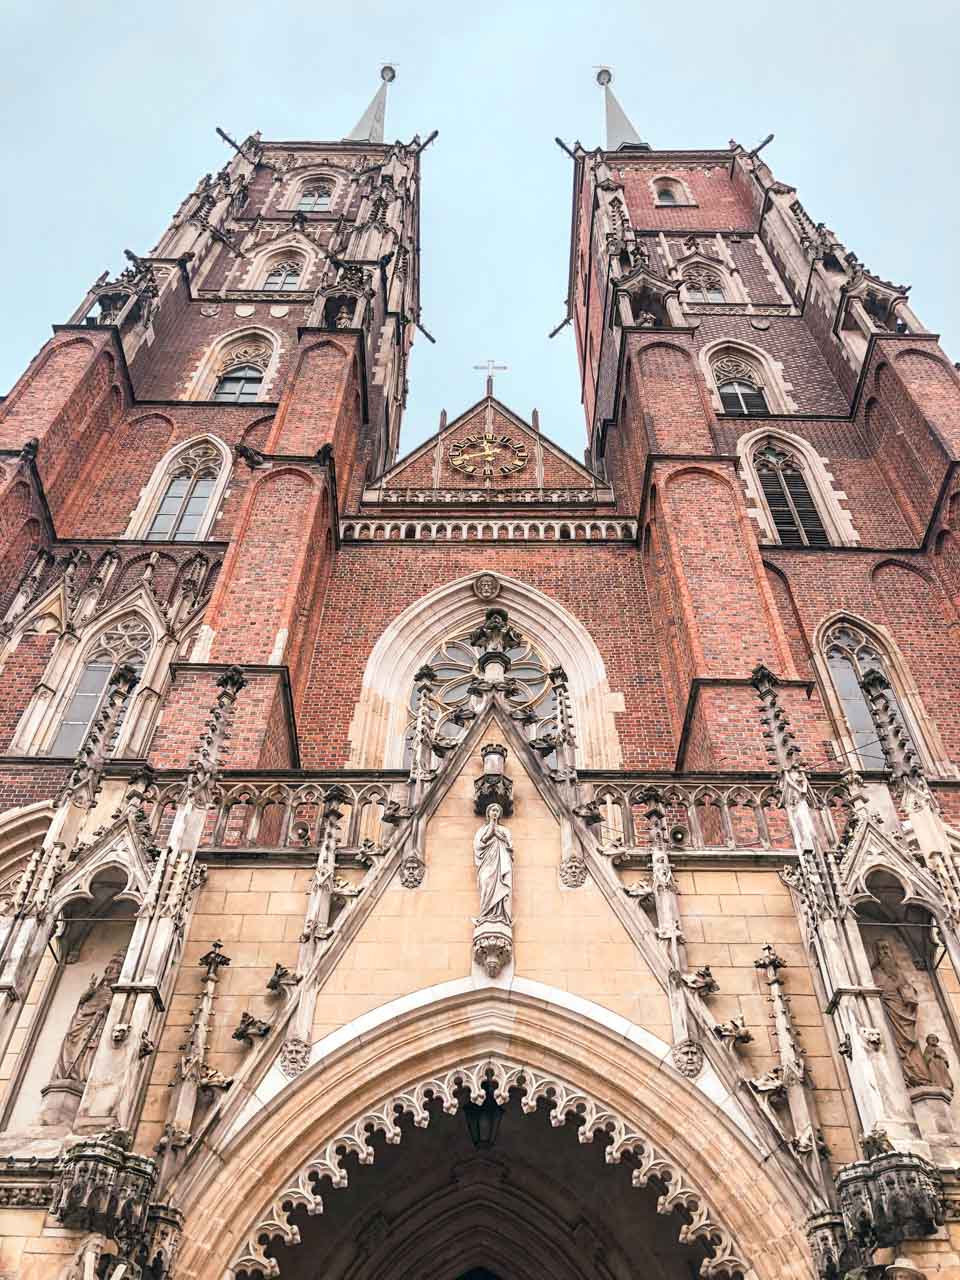 The Cathedral of St. John the Baptist in Wrocław seen from below